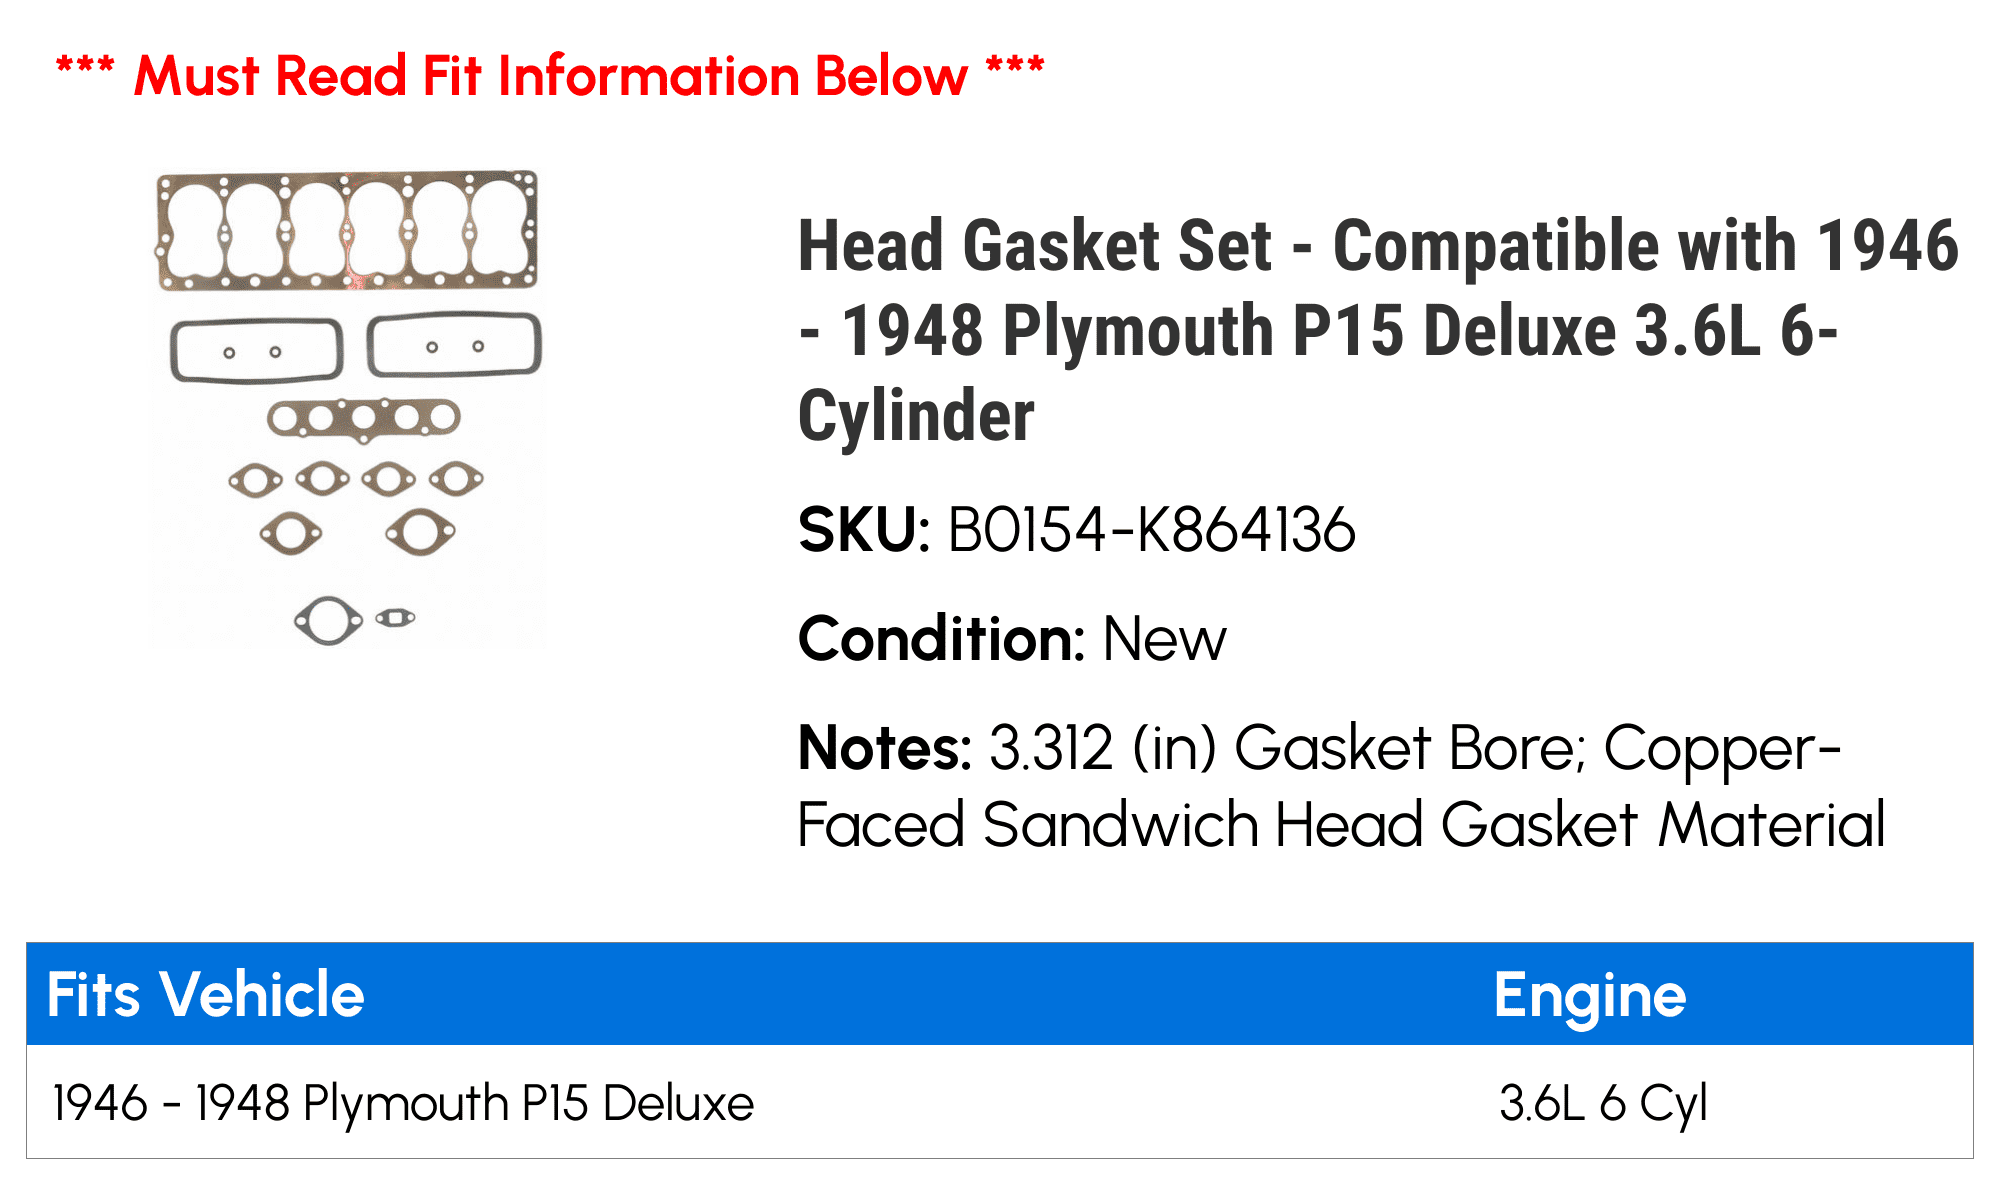 Head Gasket Set Compatible with 1946 1948 Plymouth P15 Deluxe 3.6L 6- Cylinder 1947